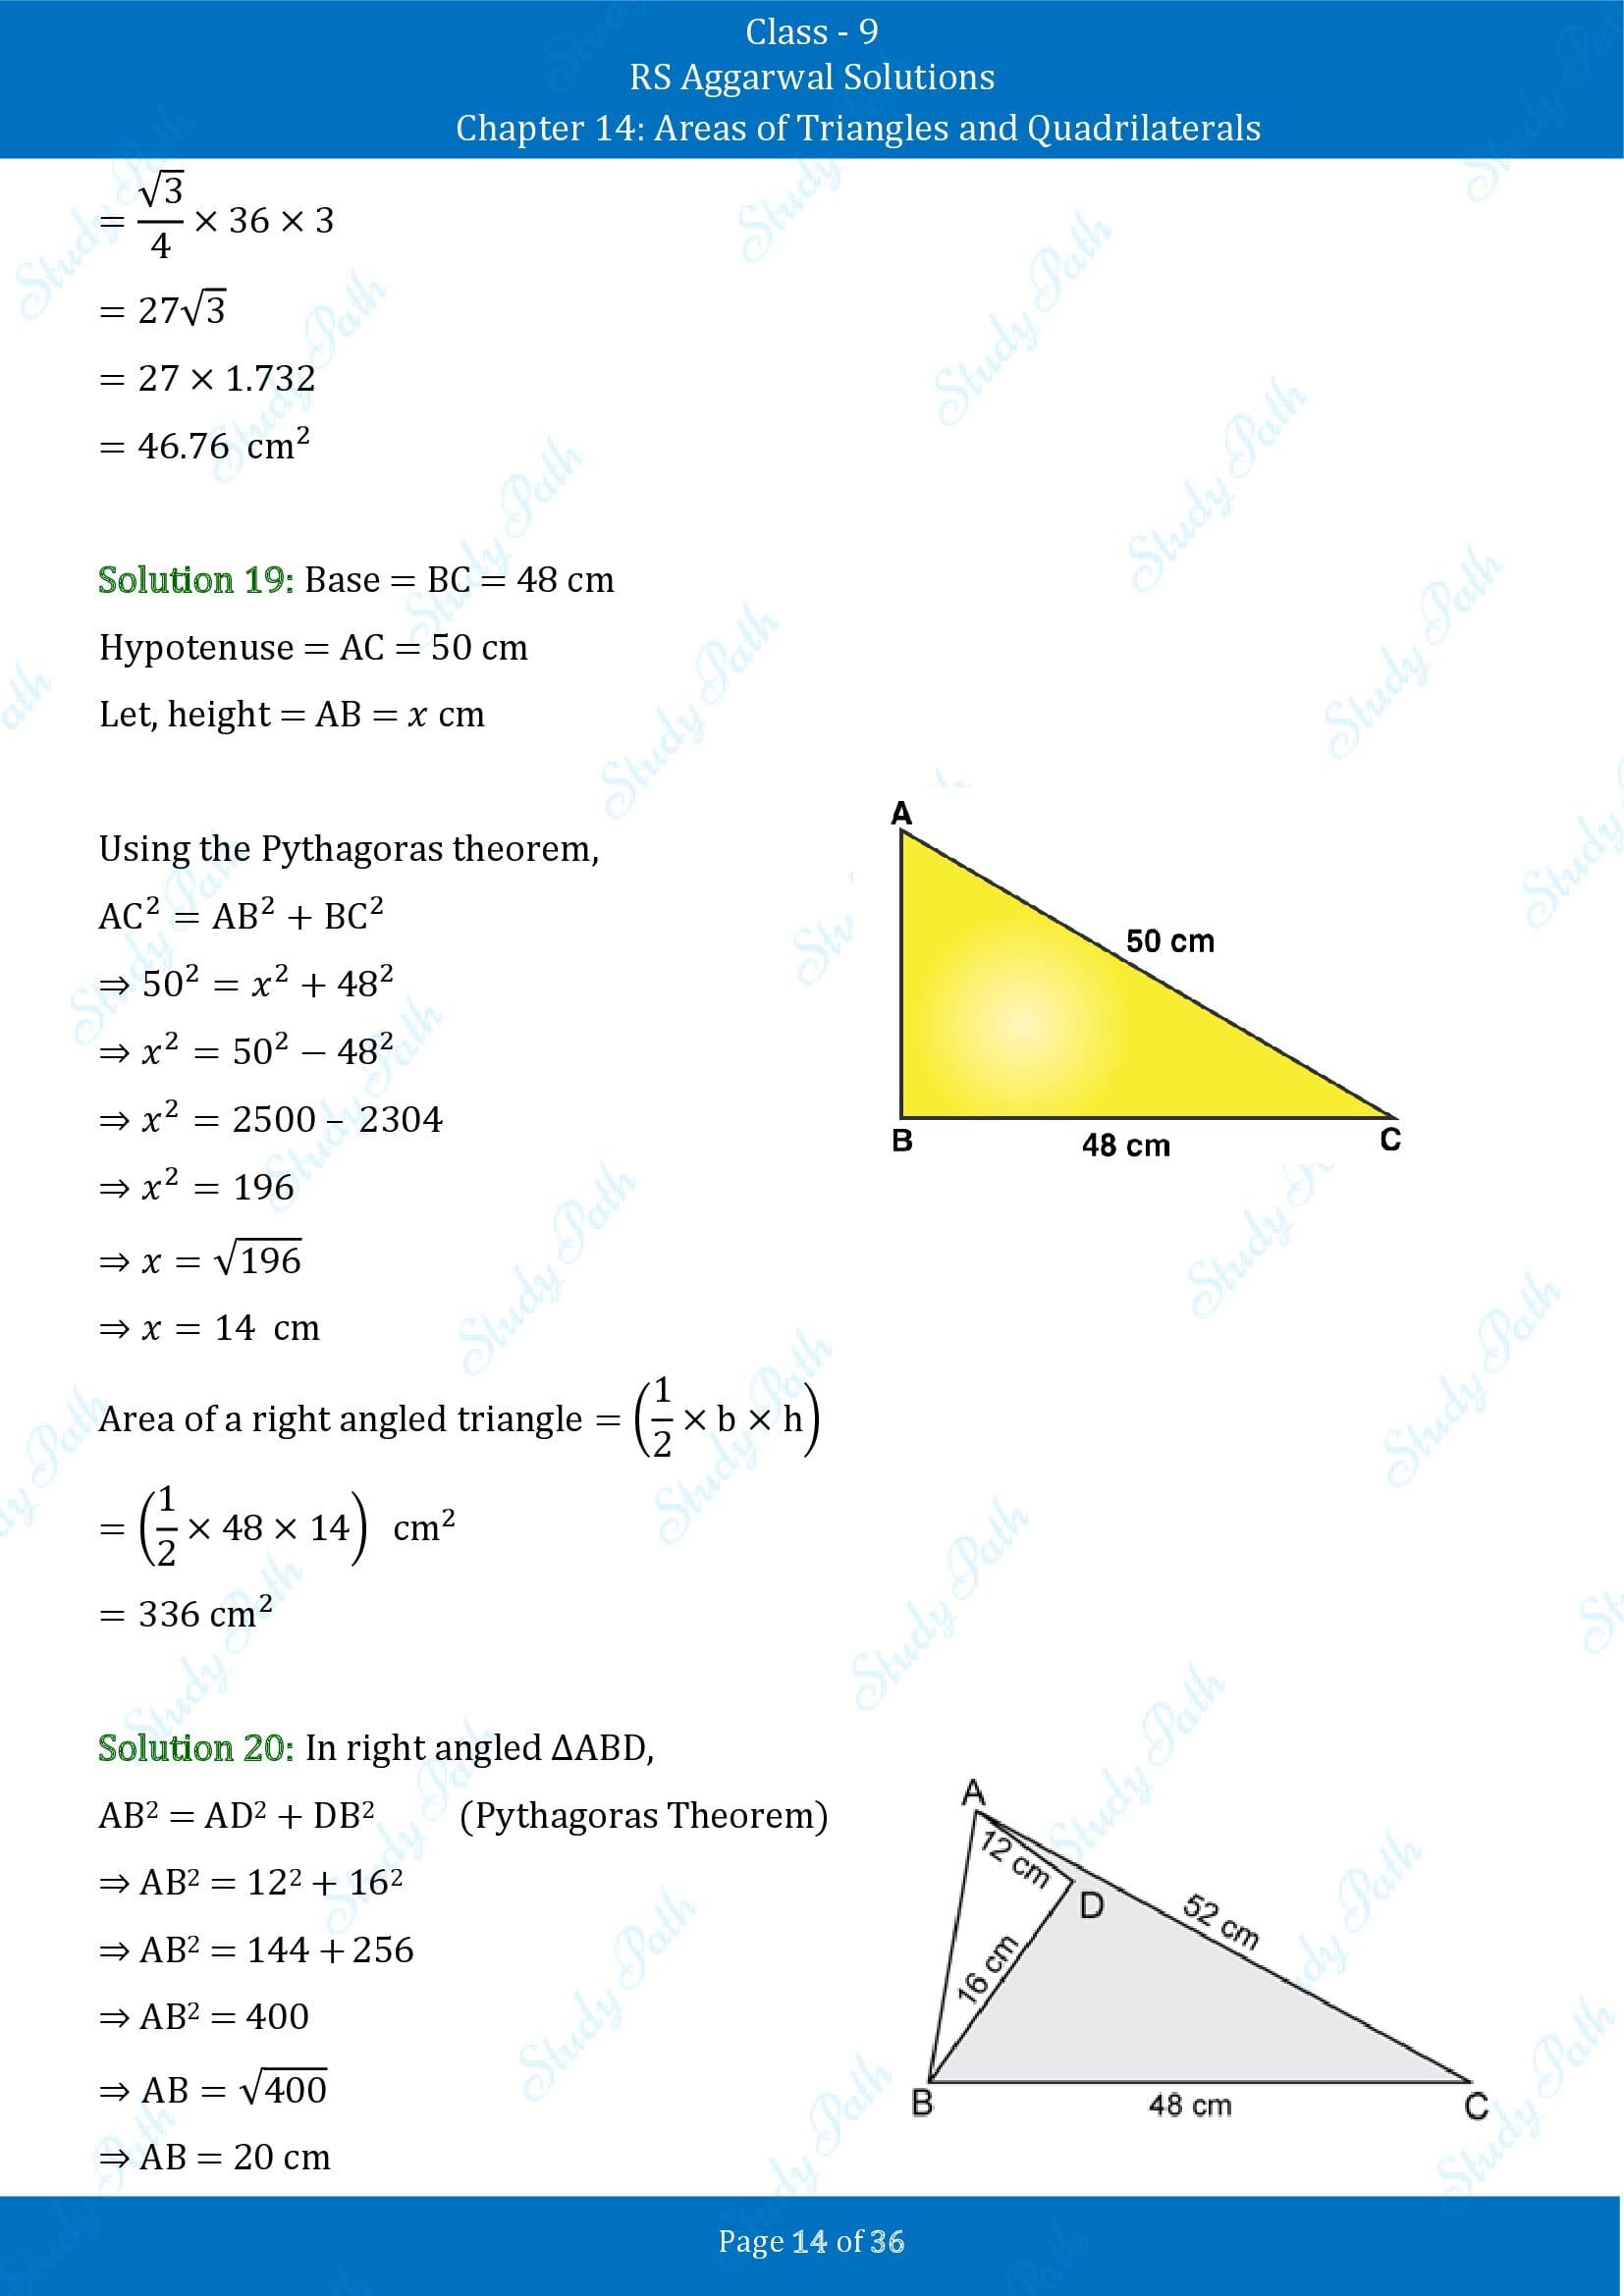 RS Aggarwal Solutions Class 9 Chapter 14 Areas of Triangles and Quadrilaterals Exercise 14 00014